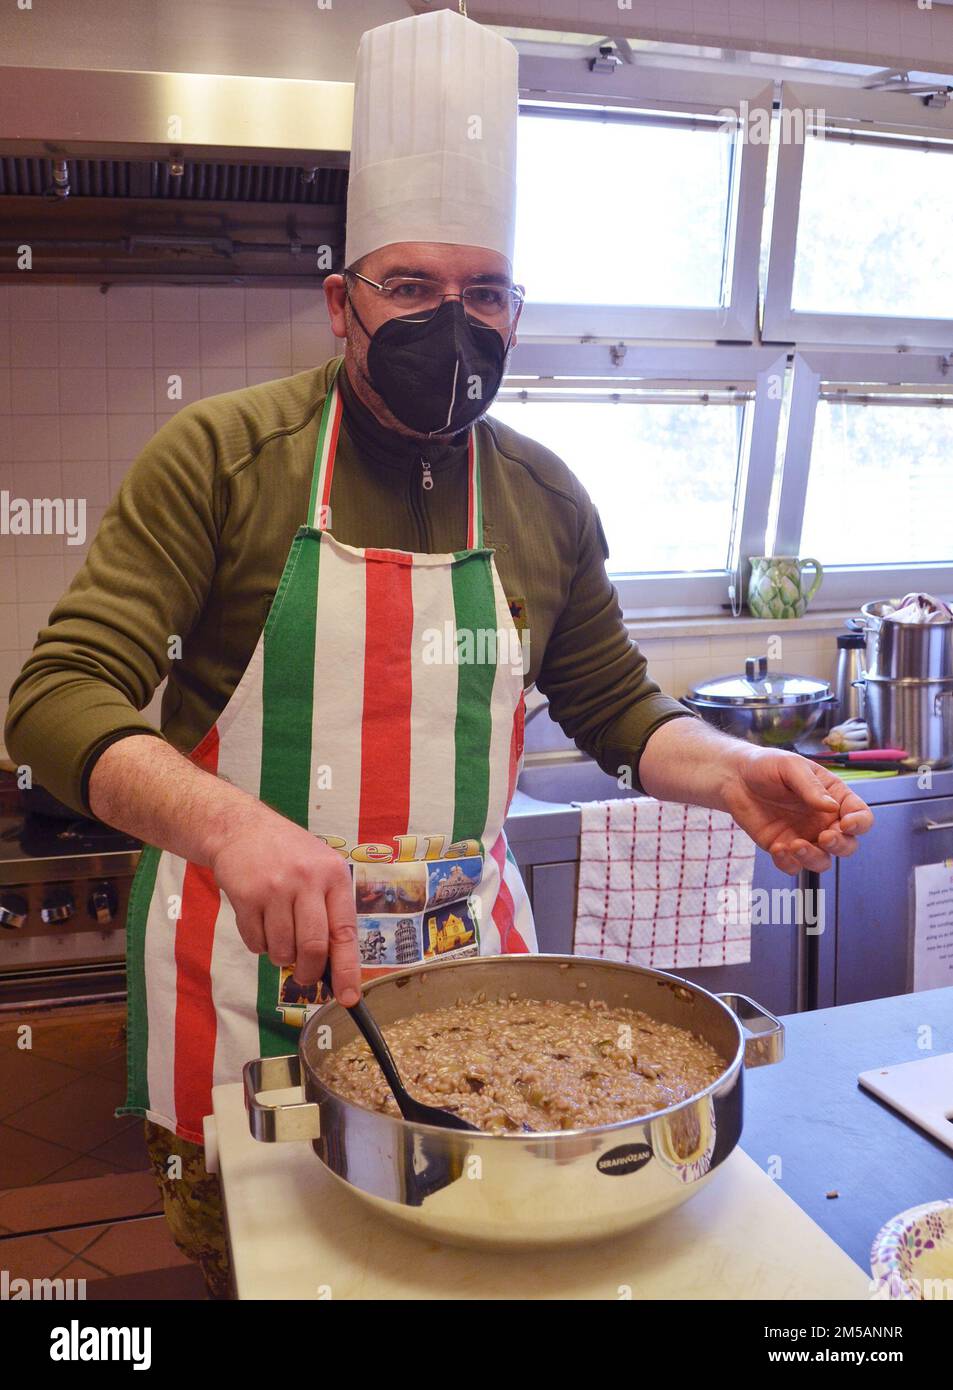 VICENZA, Italy - U.S. Army Garrison Italy Italian Base Commander Col. Michele Amendolagine, shows one of his wintertime favorites – 'Risotto al Radicchio Trevigiano Tardivo,' just before serving it to the participants in the Army Community Service “Benvenuti” class Feb. 16, 2022. The event was a perfect opportunity to familiarize and learn practical information while tasting local cuisine. Stock Photo